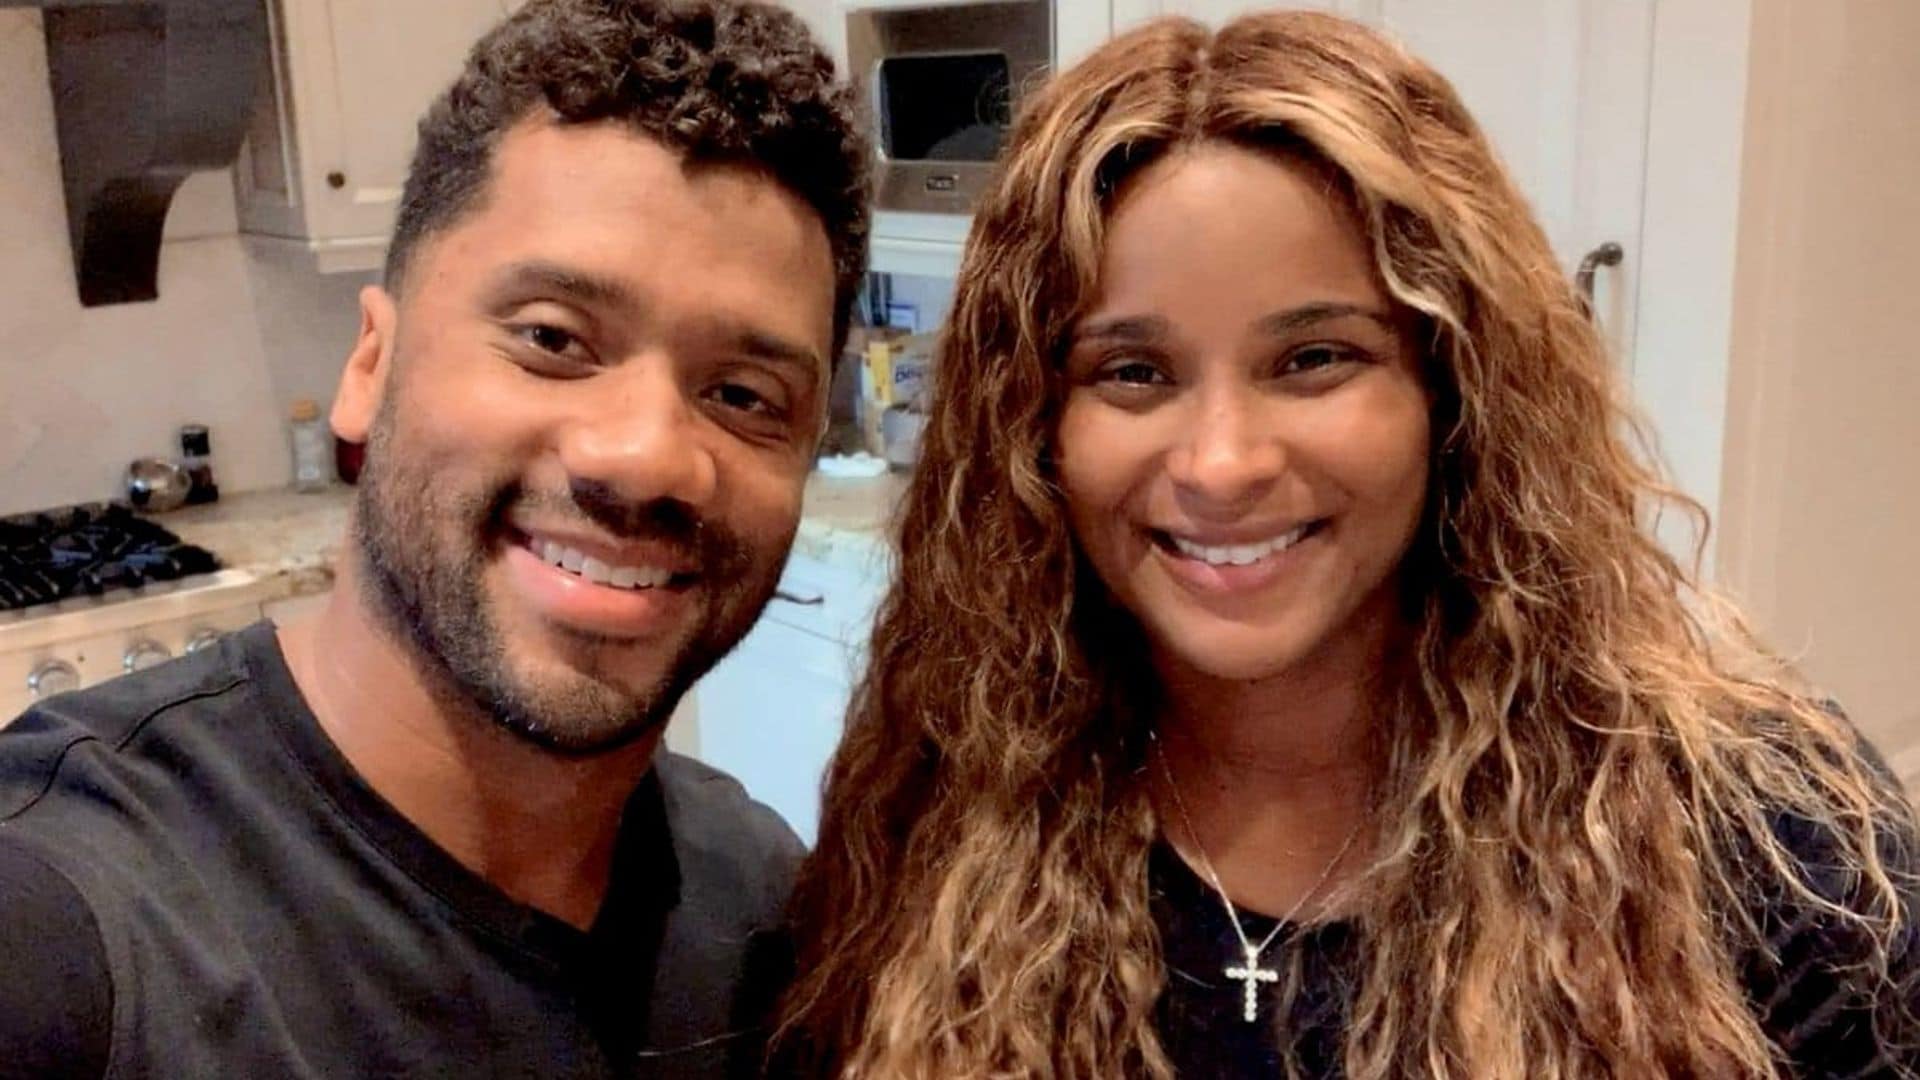 Ciara shares hilarious video of Russell Wilson after wisdom teeth surgery